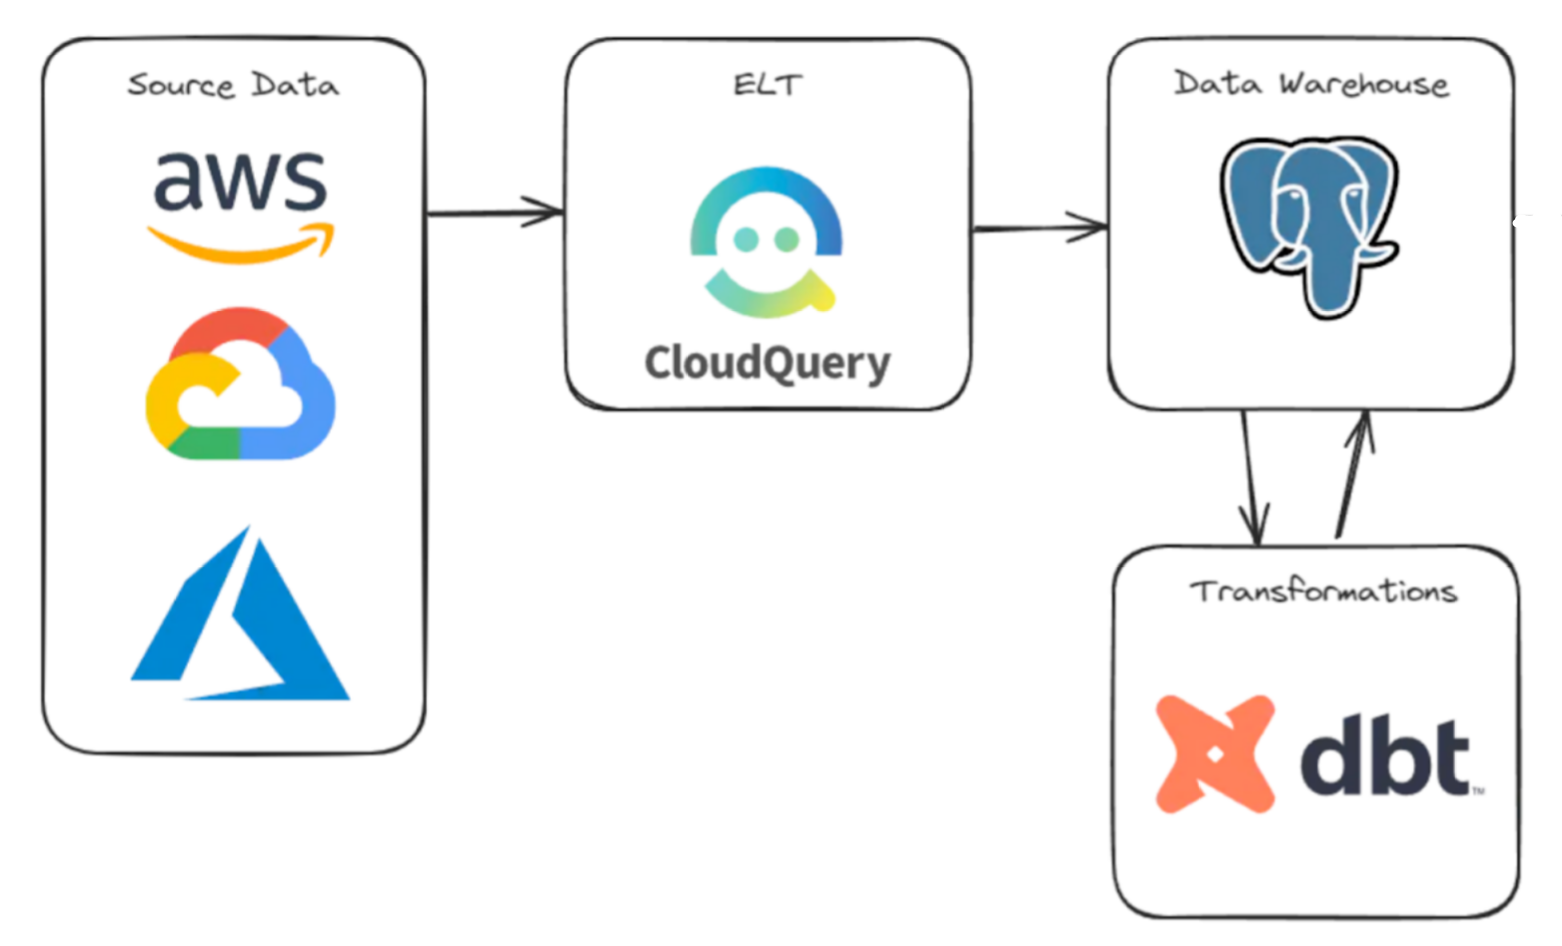 Diagram illustrating the workflow of building a cloud asset inventory. The process starts with source data from GCP, Google Cloud, and GCP, which is then processed by CloudQuery for ELT (Extract, Load, Transform). The data is stored in a PostgreSQL data warehouse. dbt is used for data transformations within the data warehouse.